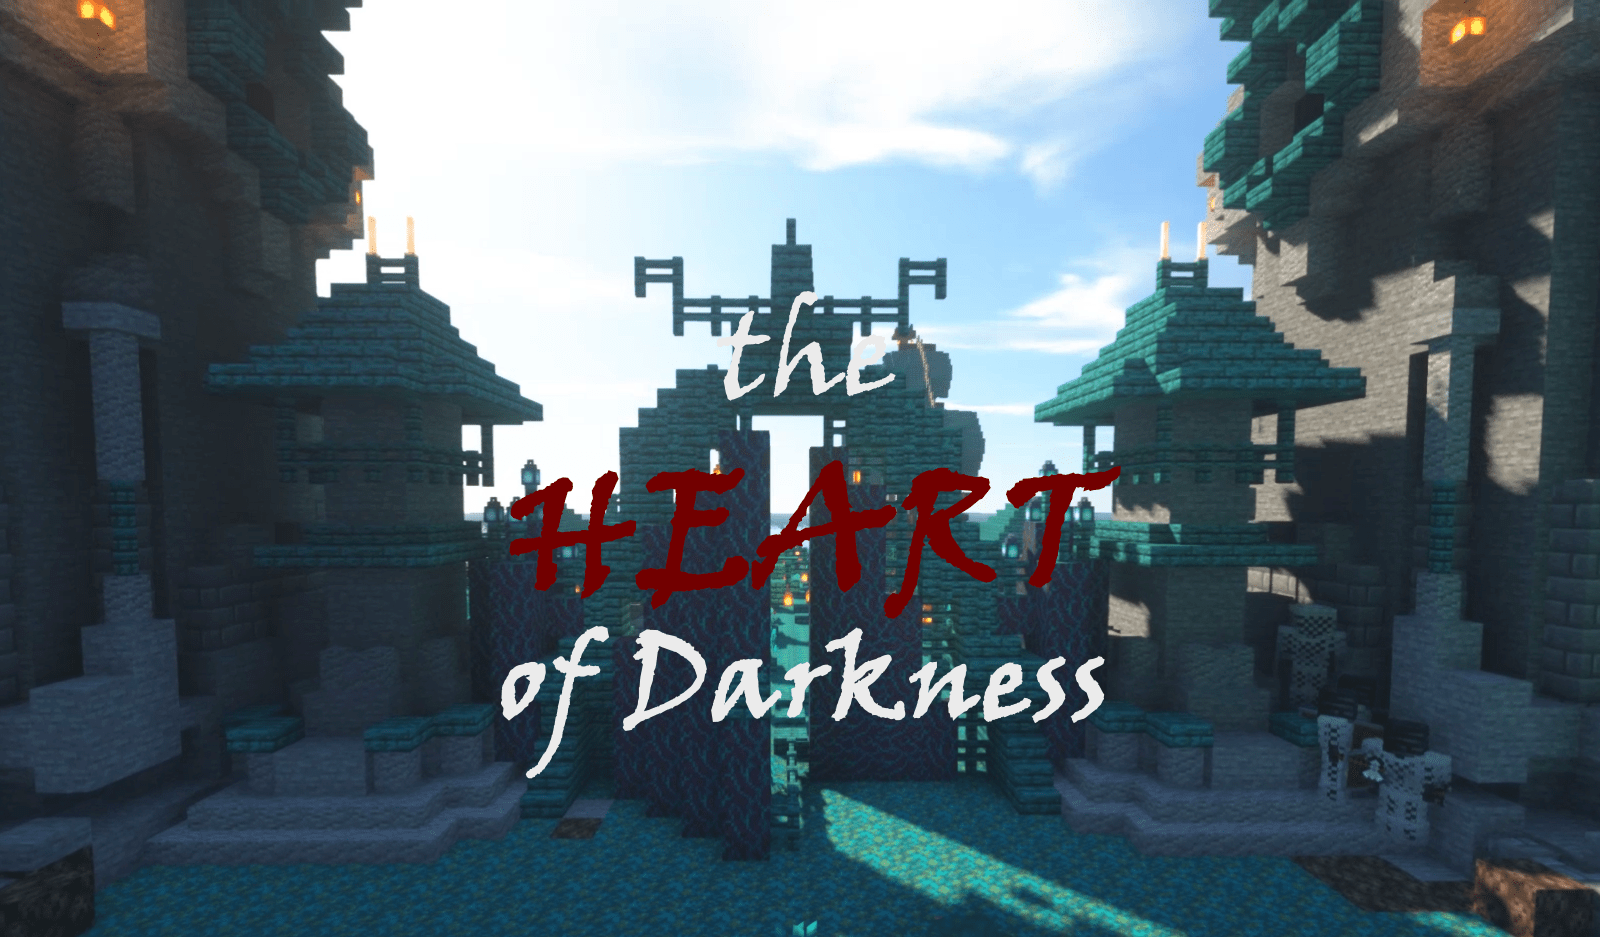 Download Heart of Darkness for Minecraft 1.16.5